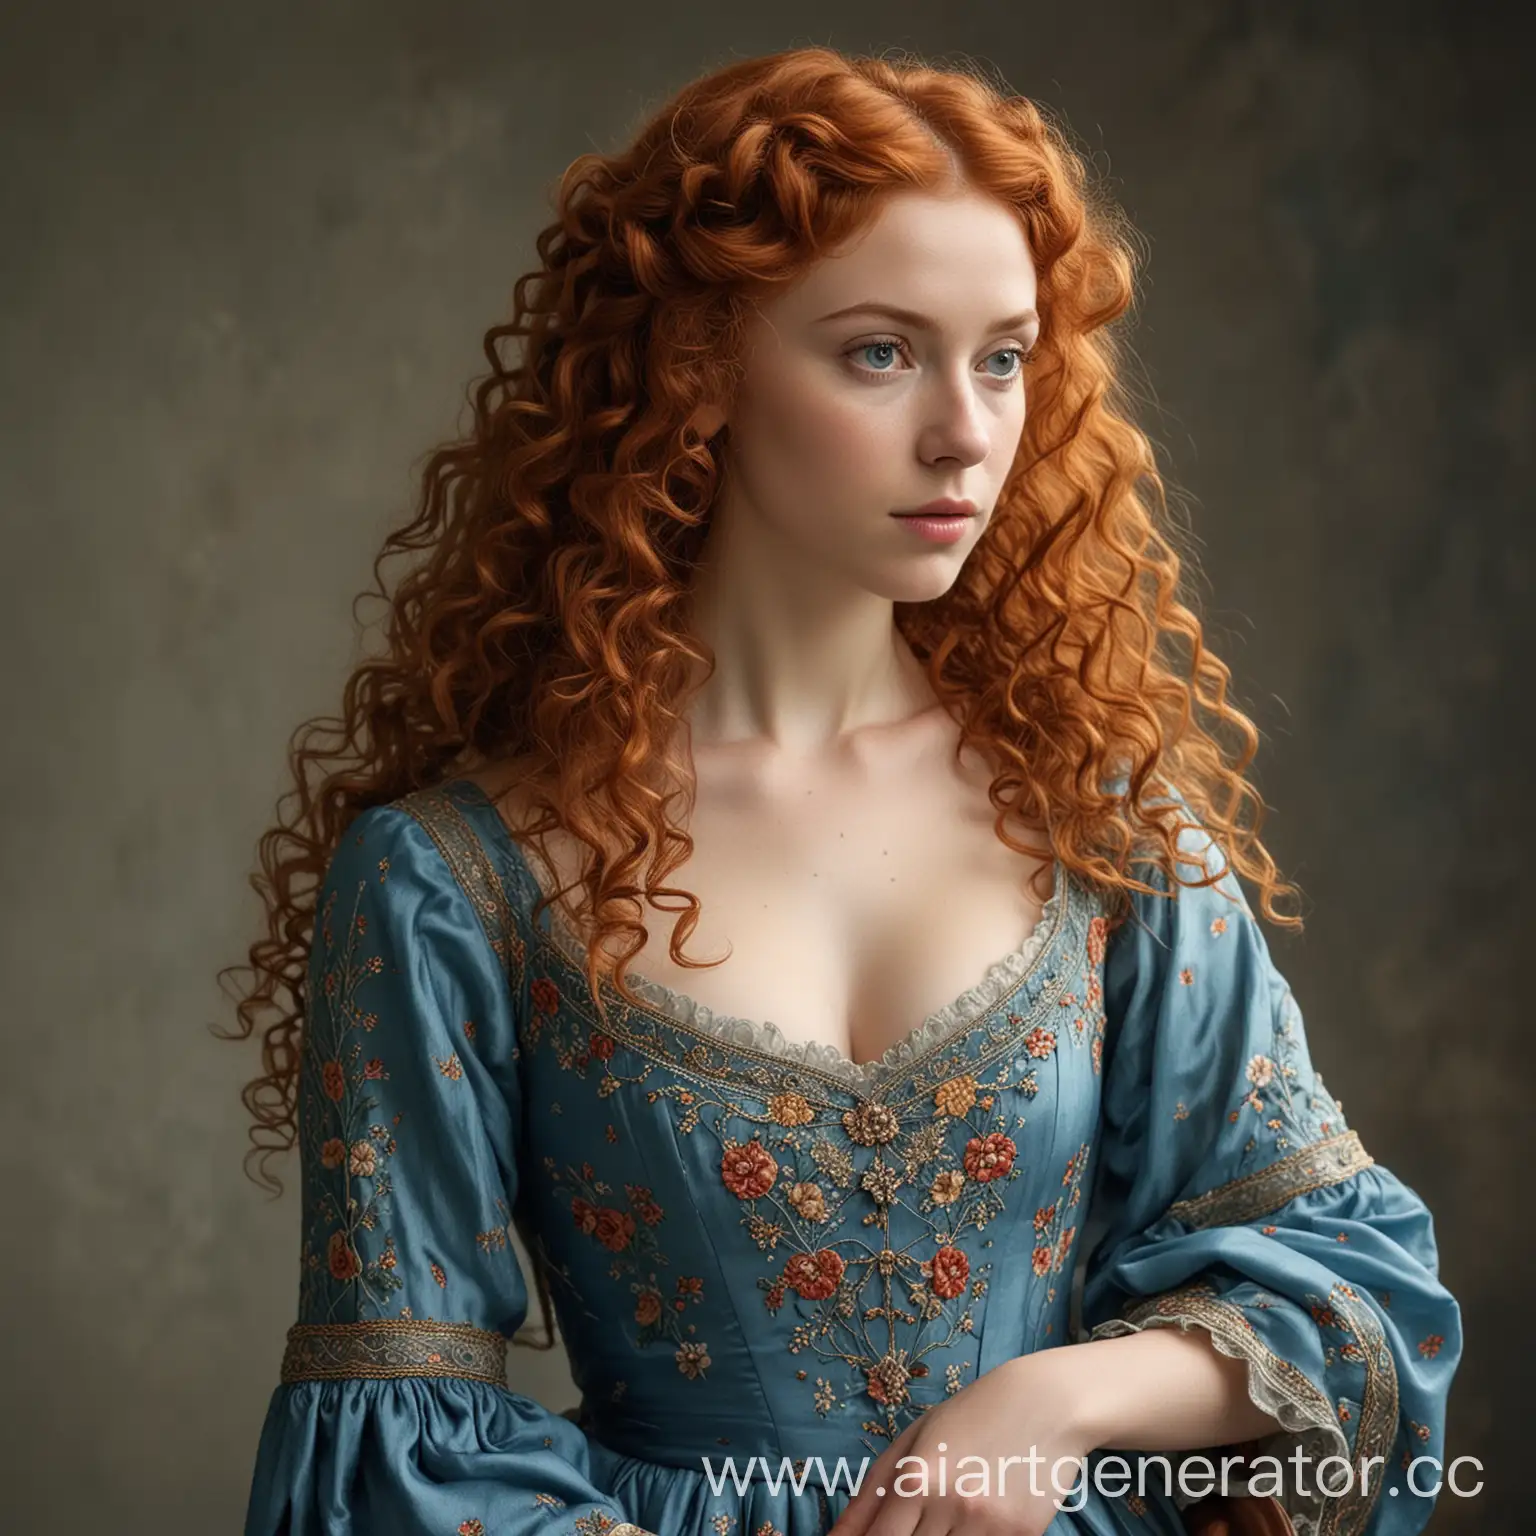 Medieval-Noblewoman-in-Blue-Floral-Dress-with-Luxurious-Red-Hair